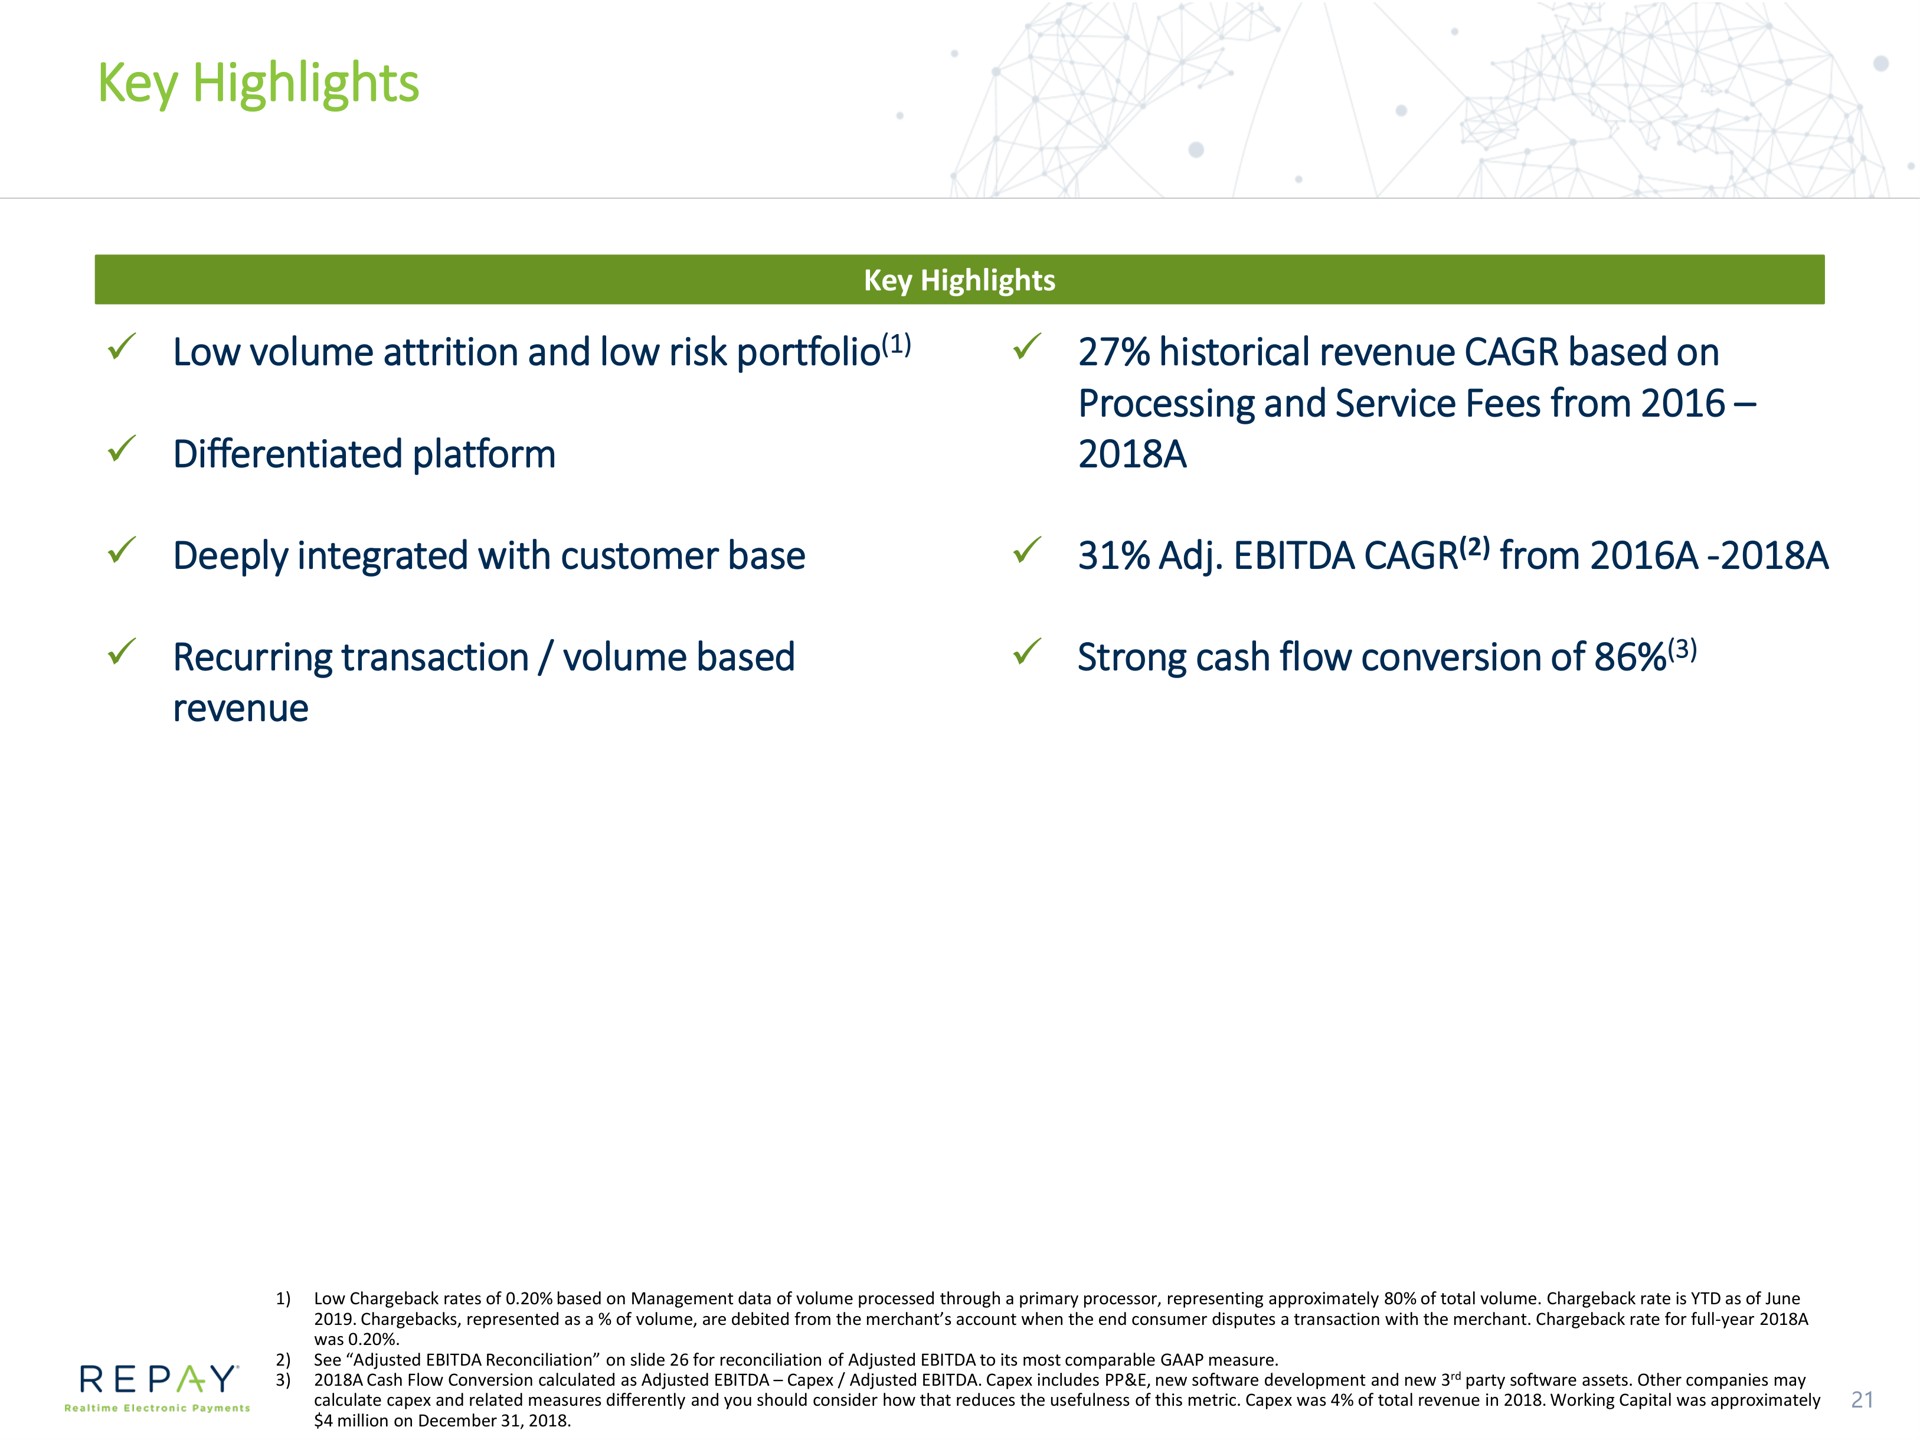 key highlights low volume attrition and low risk portfolio differentiated platform historical revenue based on a deeply integrated with customer base from a a recurring transaction volume based revenue strong cash flow conversion of | Repay